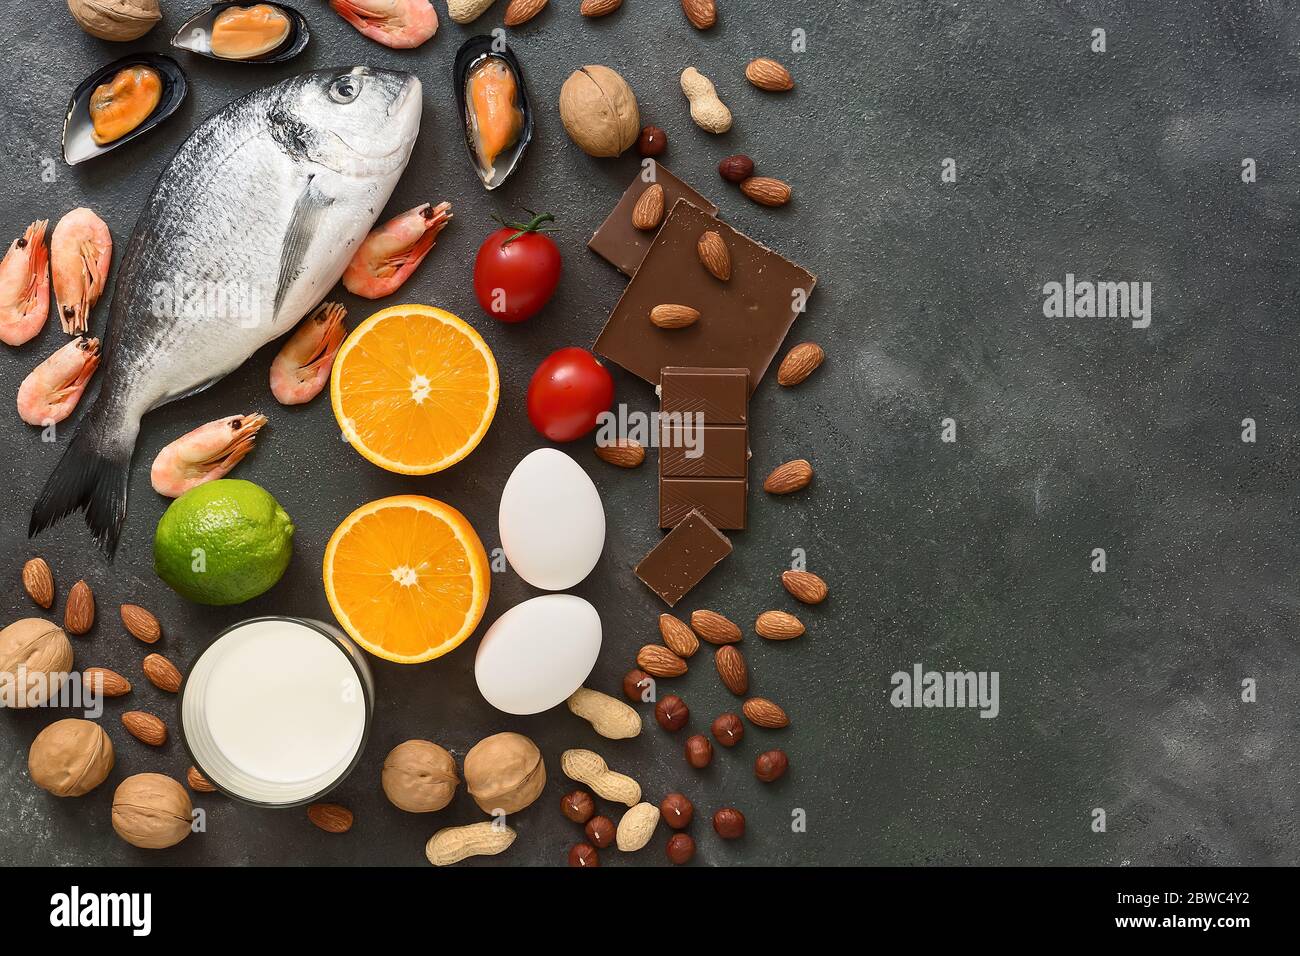 Food allergens. Seafood, milk, chocolate, nuts, citrus fruits, eggs. Allergic food concept. Top view, flat lay, copy space Stock Photo